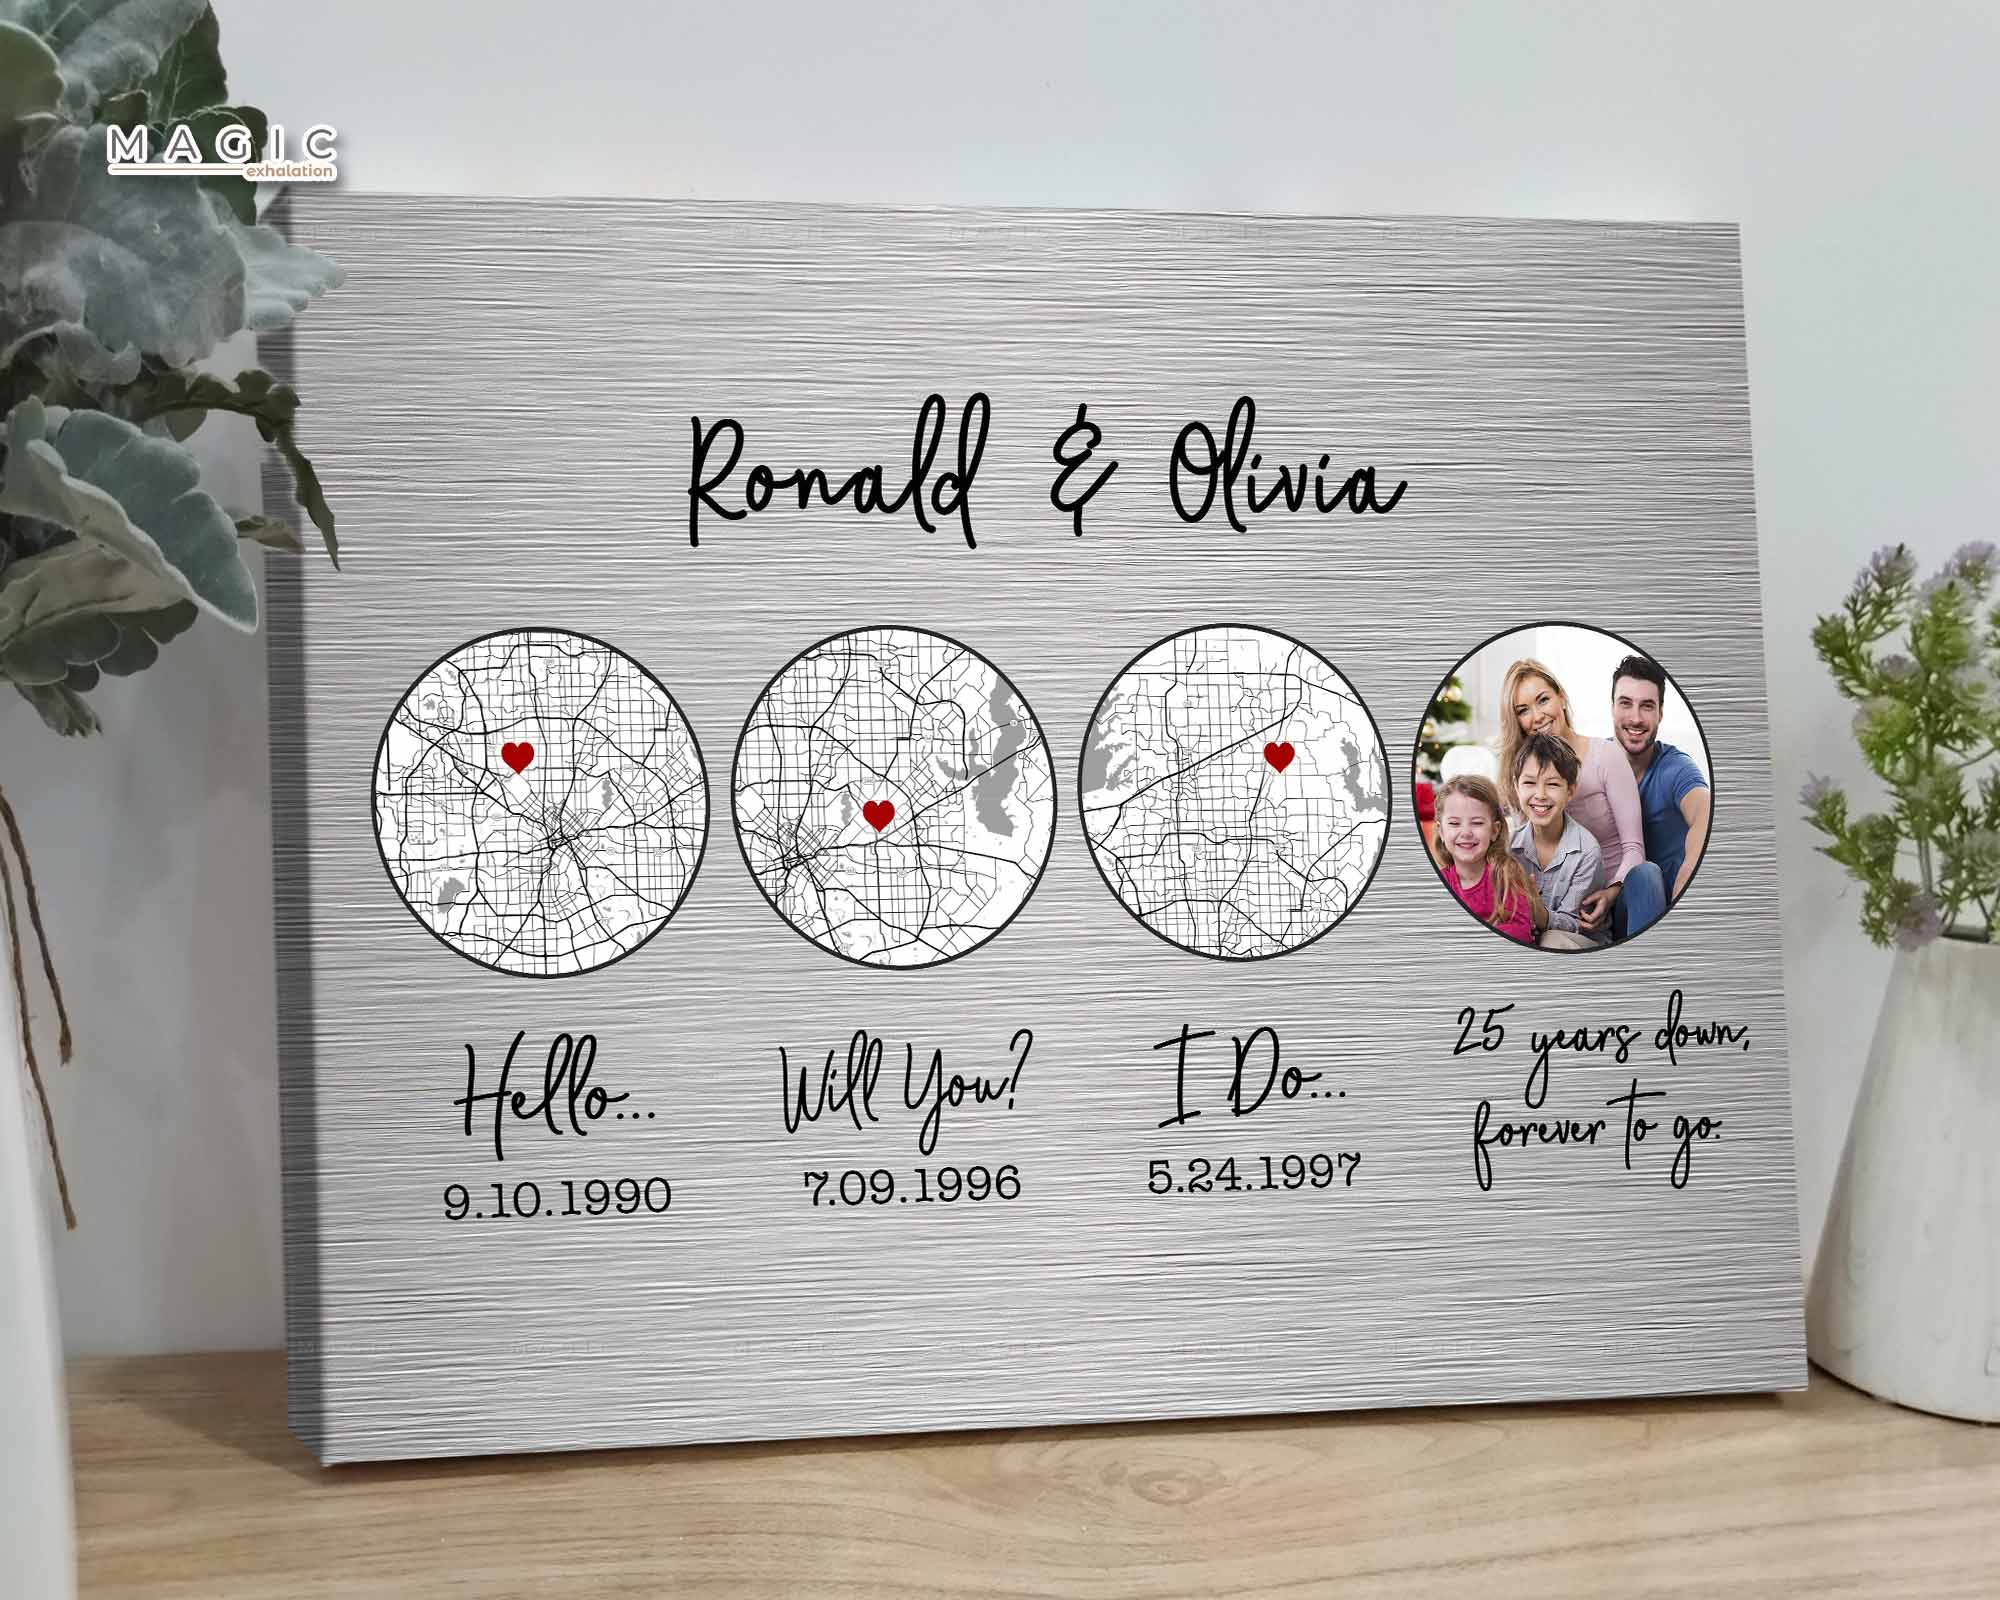 Personalized Map For 25th Anniversary Gift Canvas Prints, Custom City Map 25th Wedding Anniversary Gift For Husband Wife, Thoughtful Anniversary Gifts